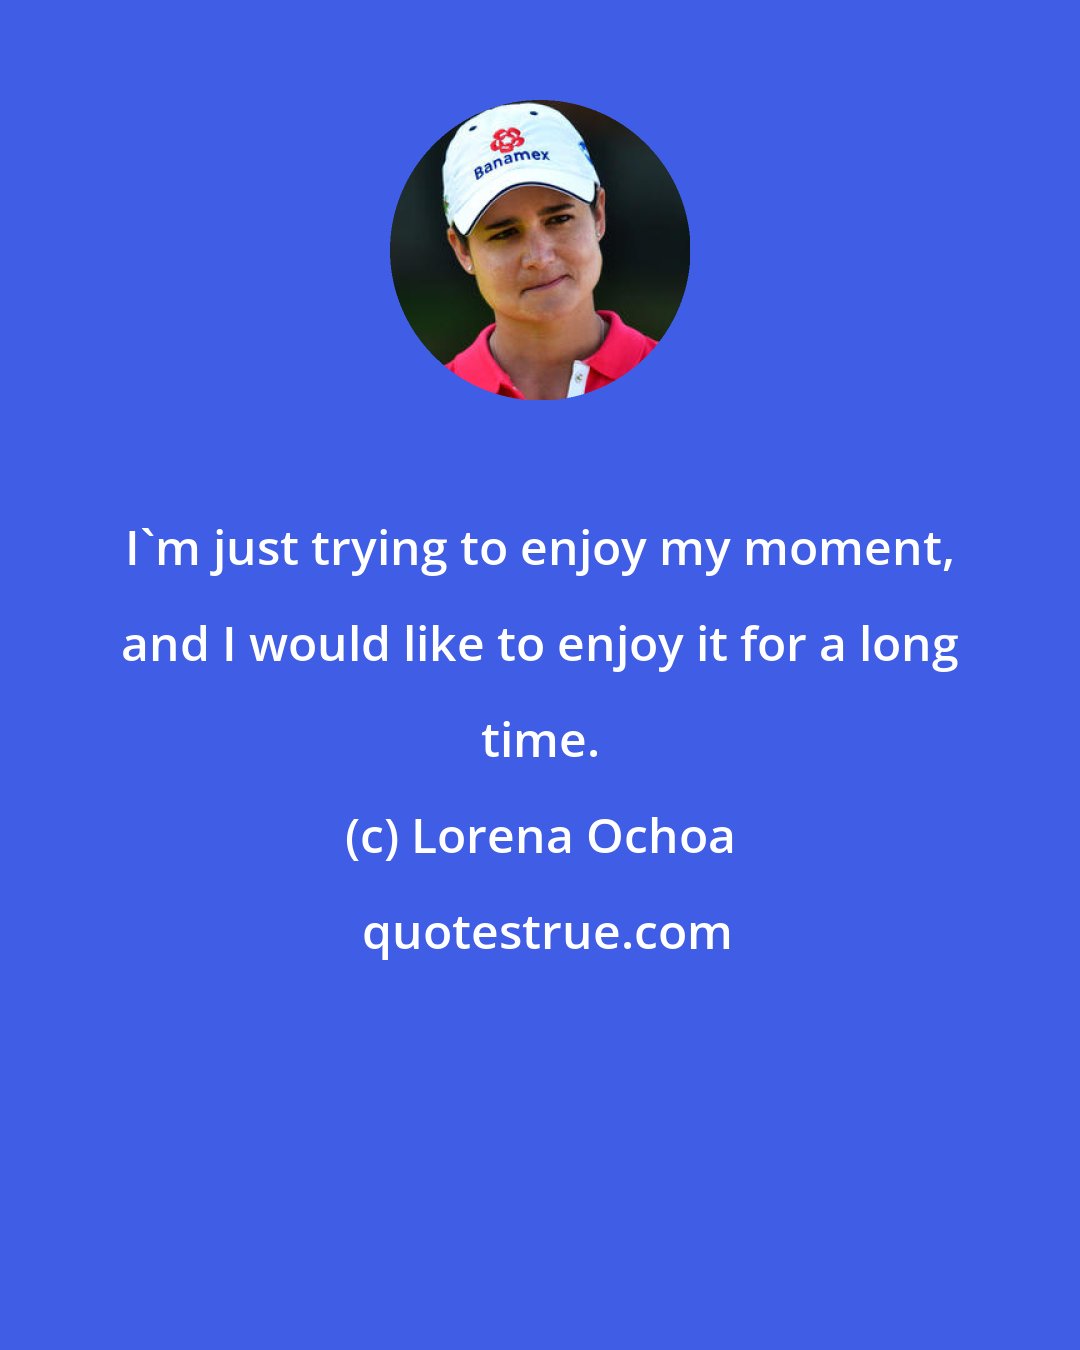 Lorena Ochoa: I'm just trying to enjoy my moment, and I would like to enjoy it for a long time.